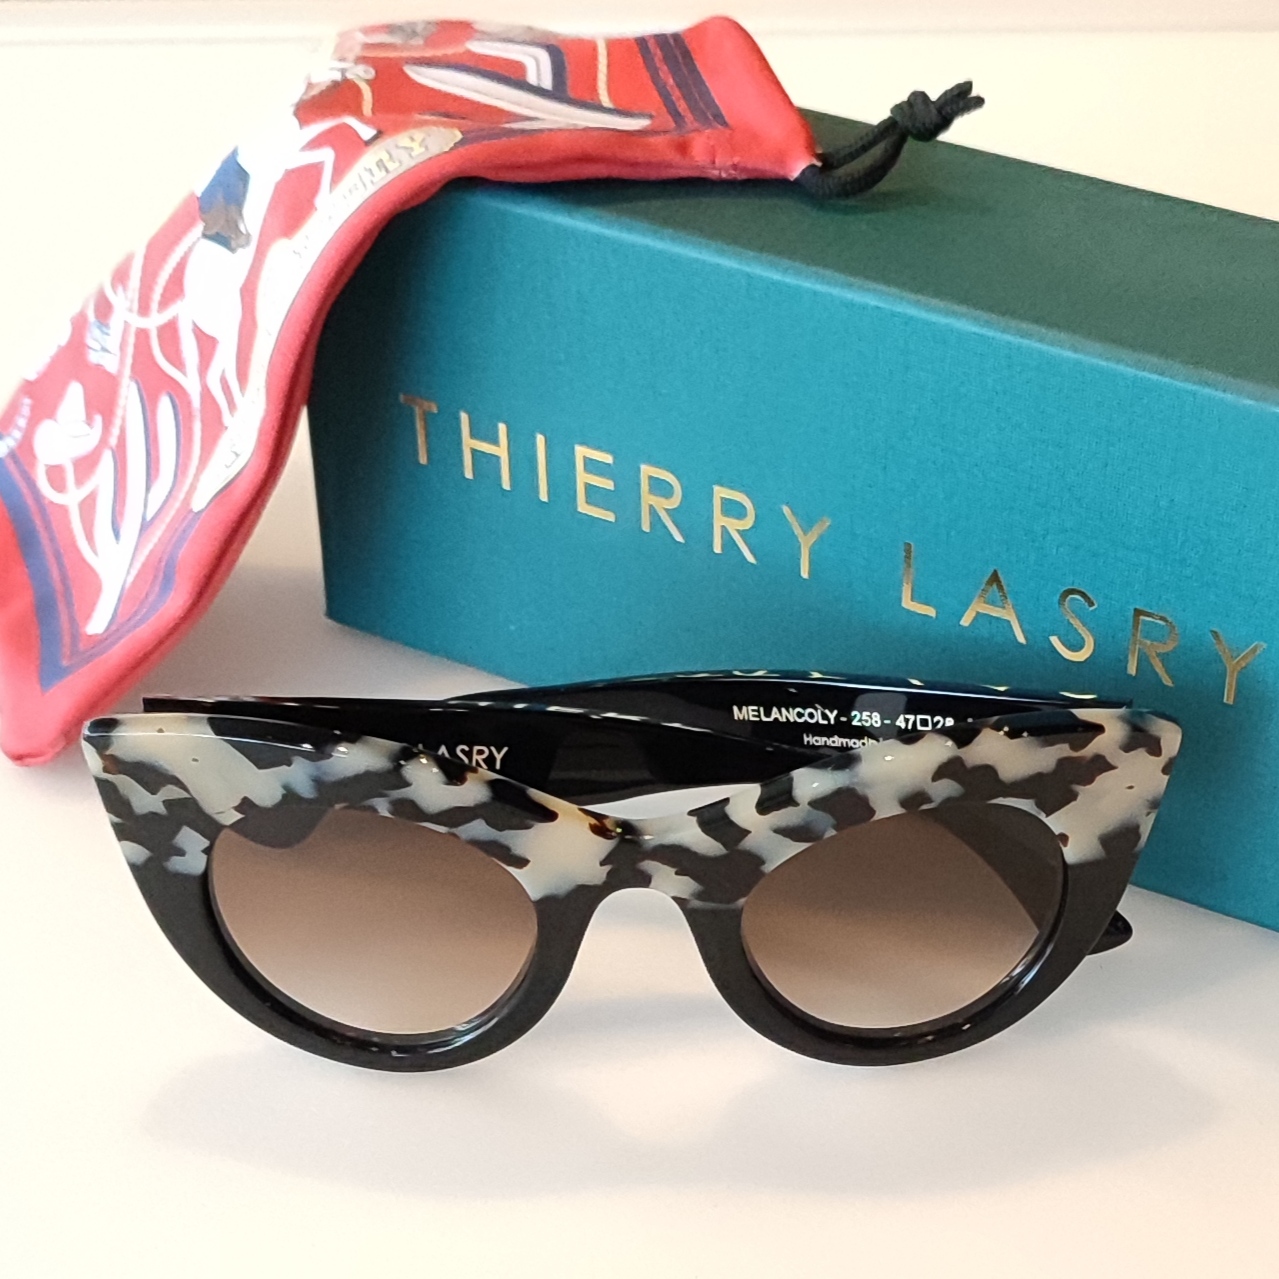 Theirry Lasry Melancoly frame in colour 258